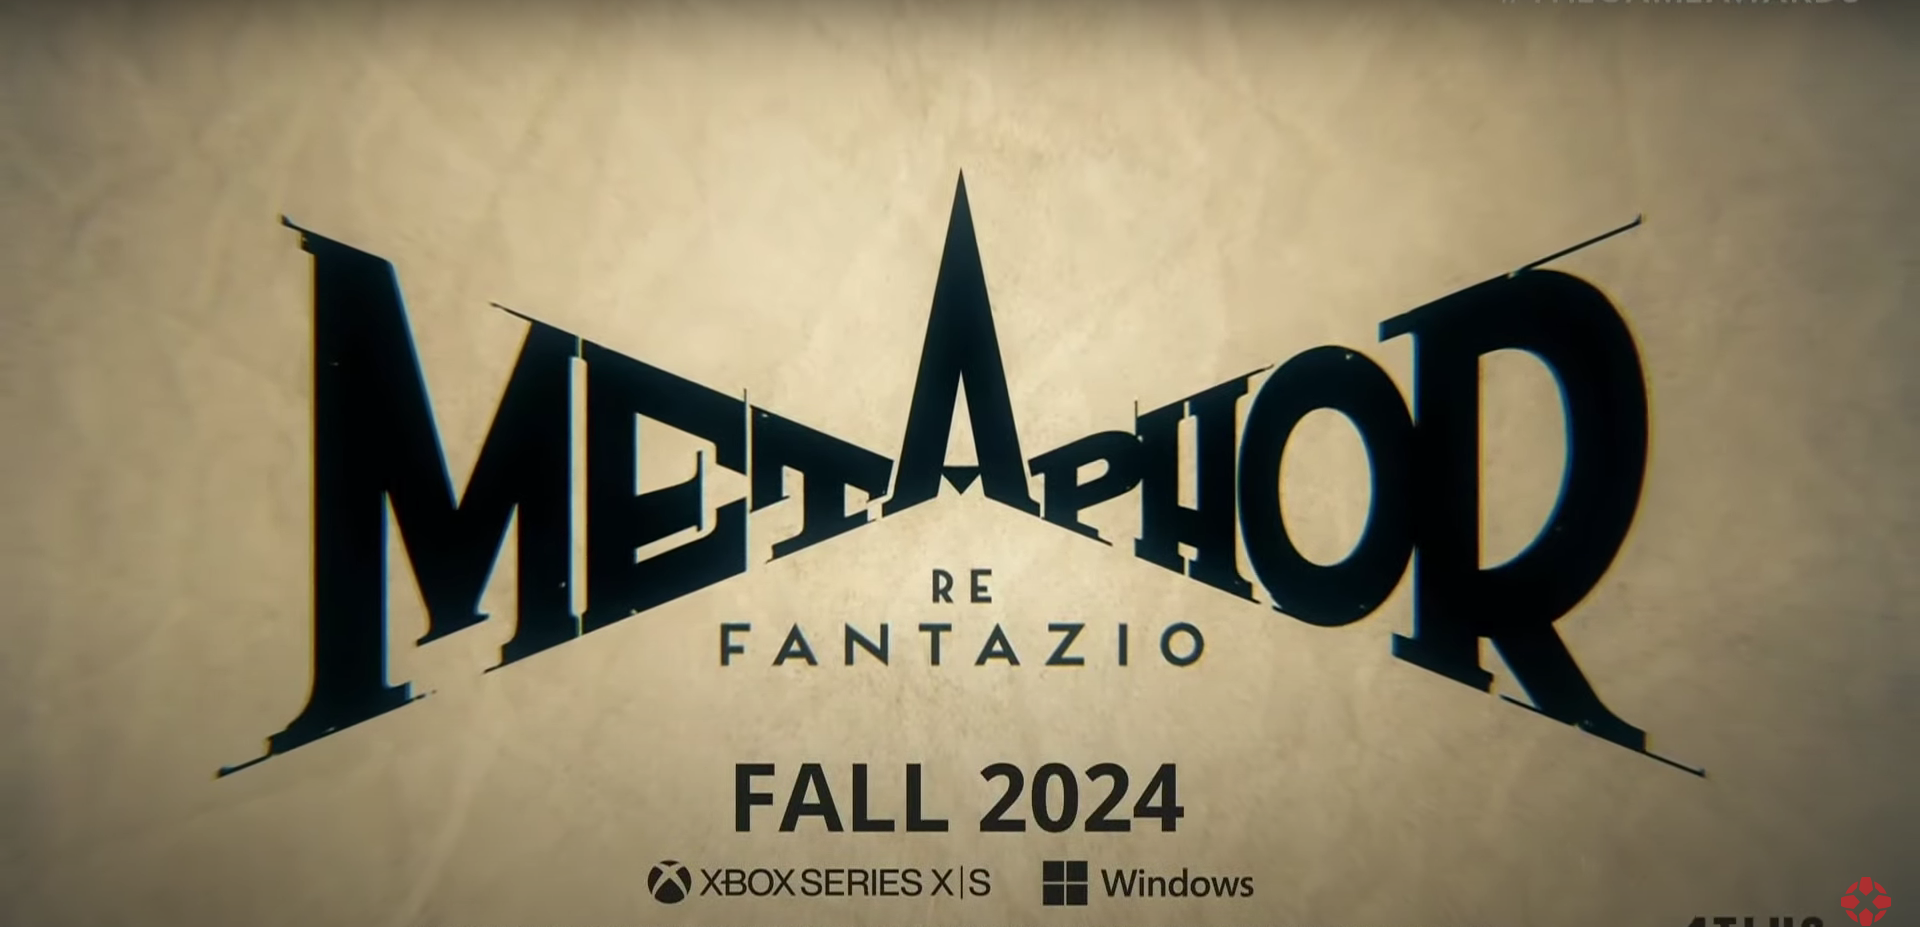 A screenshot of the Metaphor ReFantazio title card from The Game Awards.